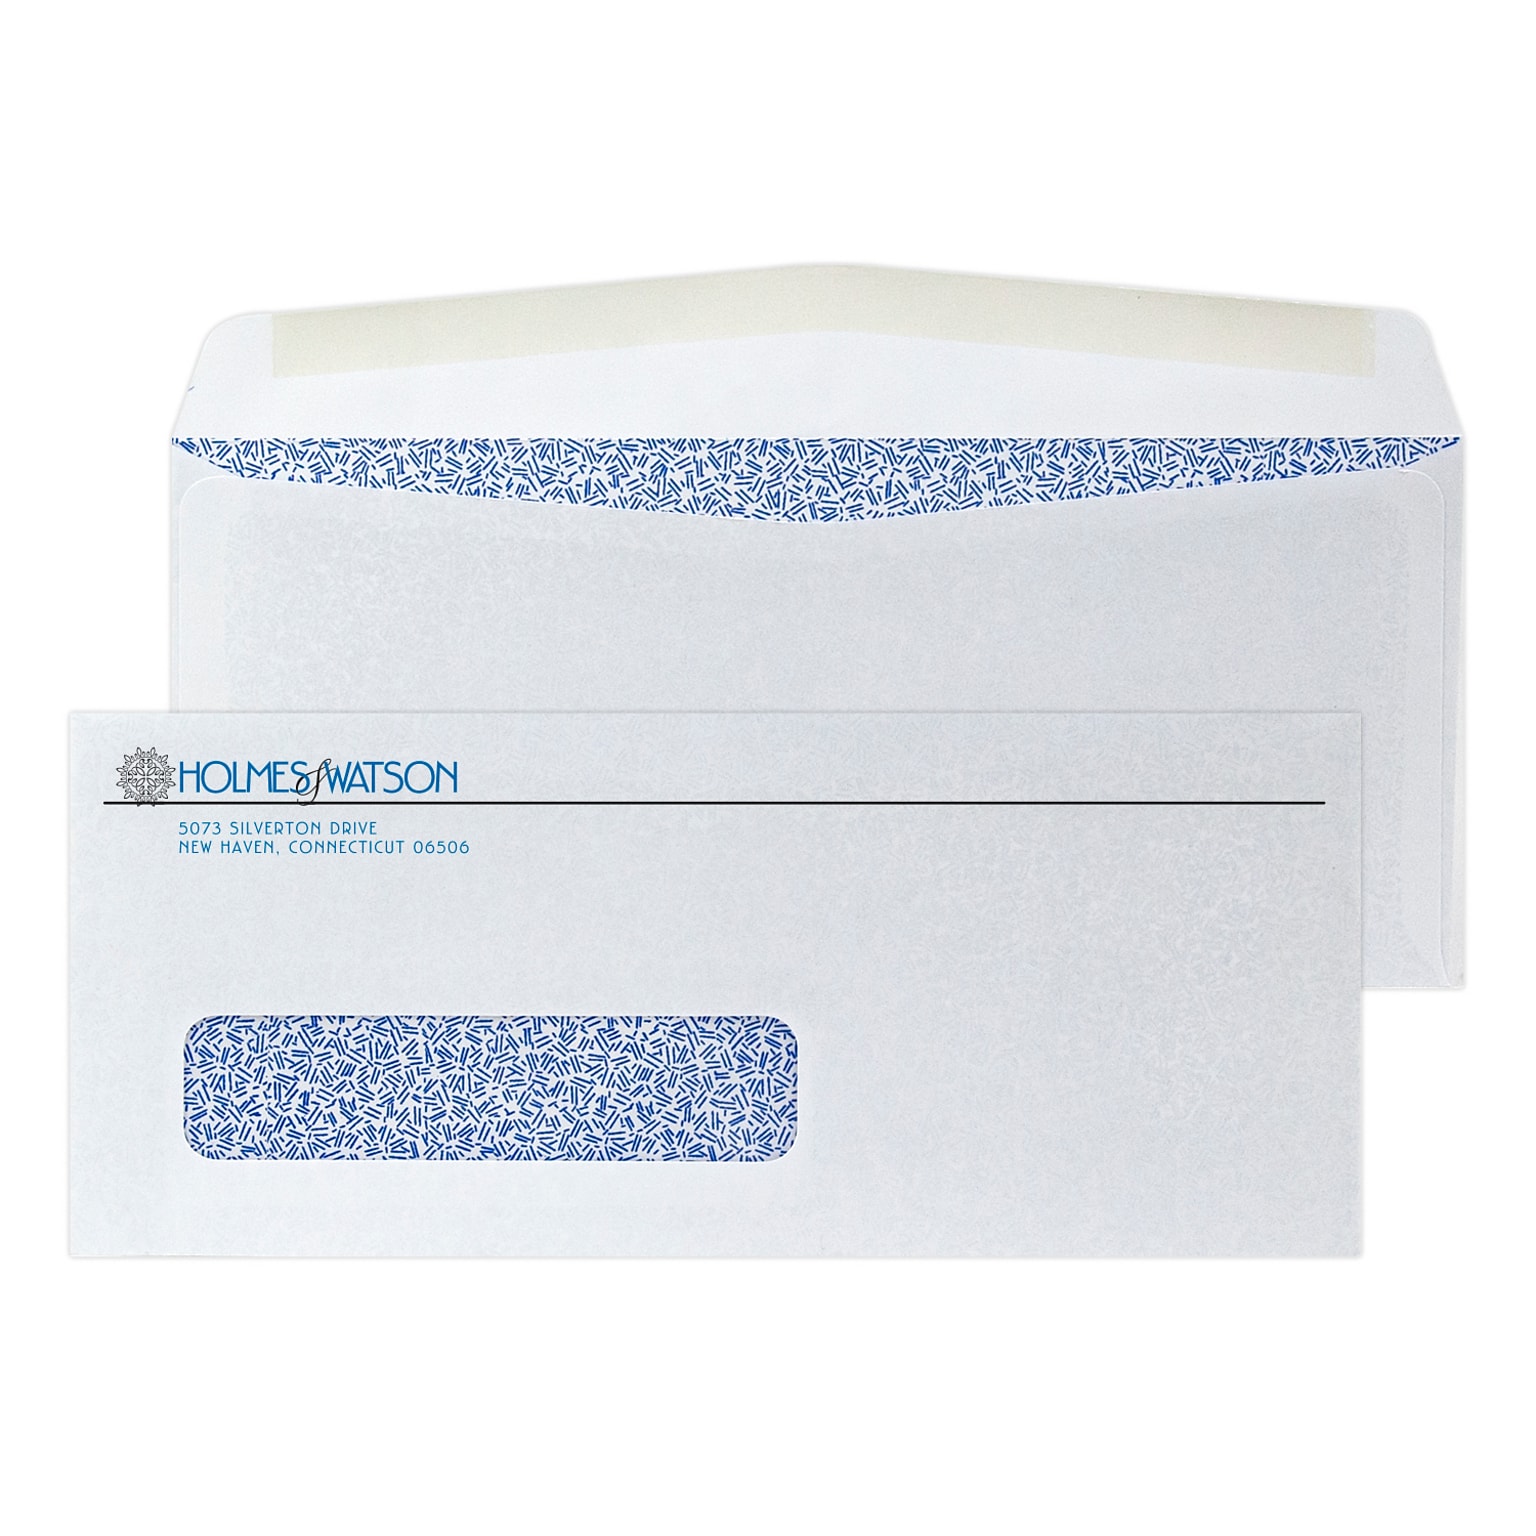 Custom #10 Window Envelopes with Security Tint, 4 1/4 x 9 1/2, 24# White Wove, 2 Standard Inks, 250 / Pack